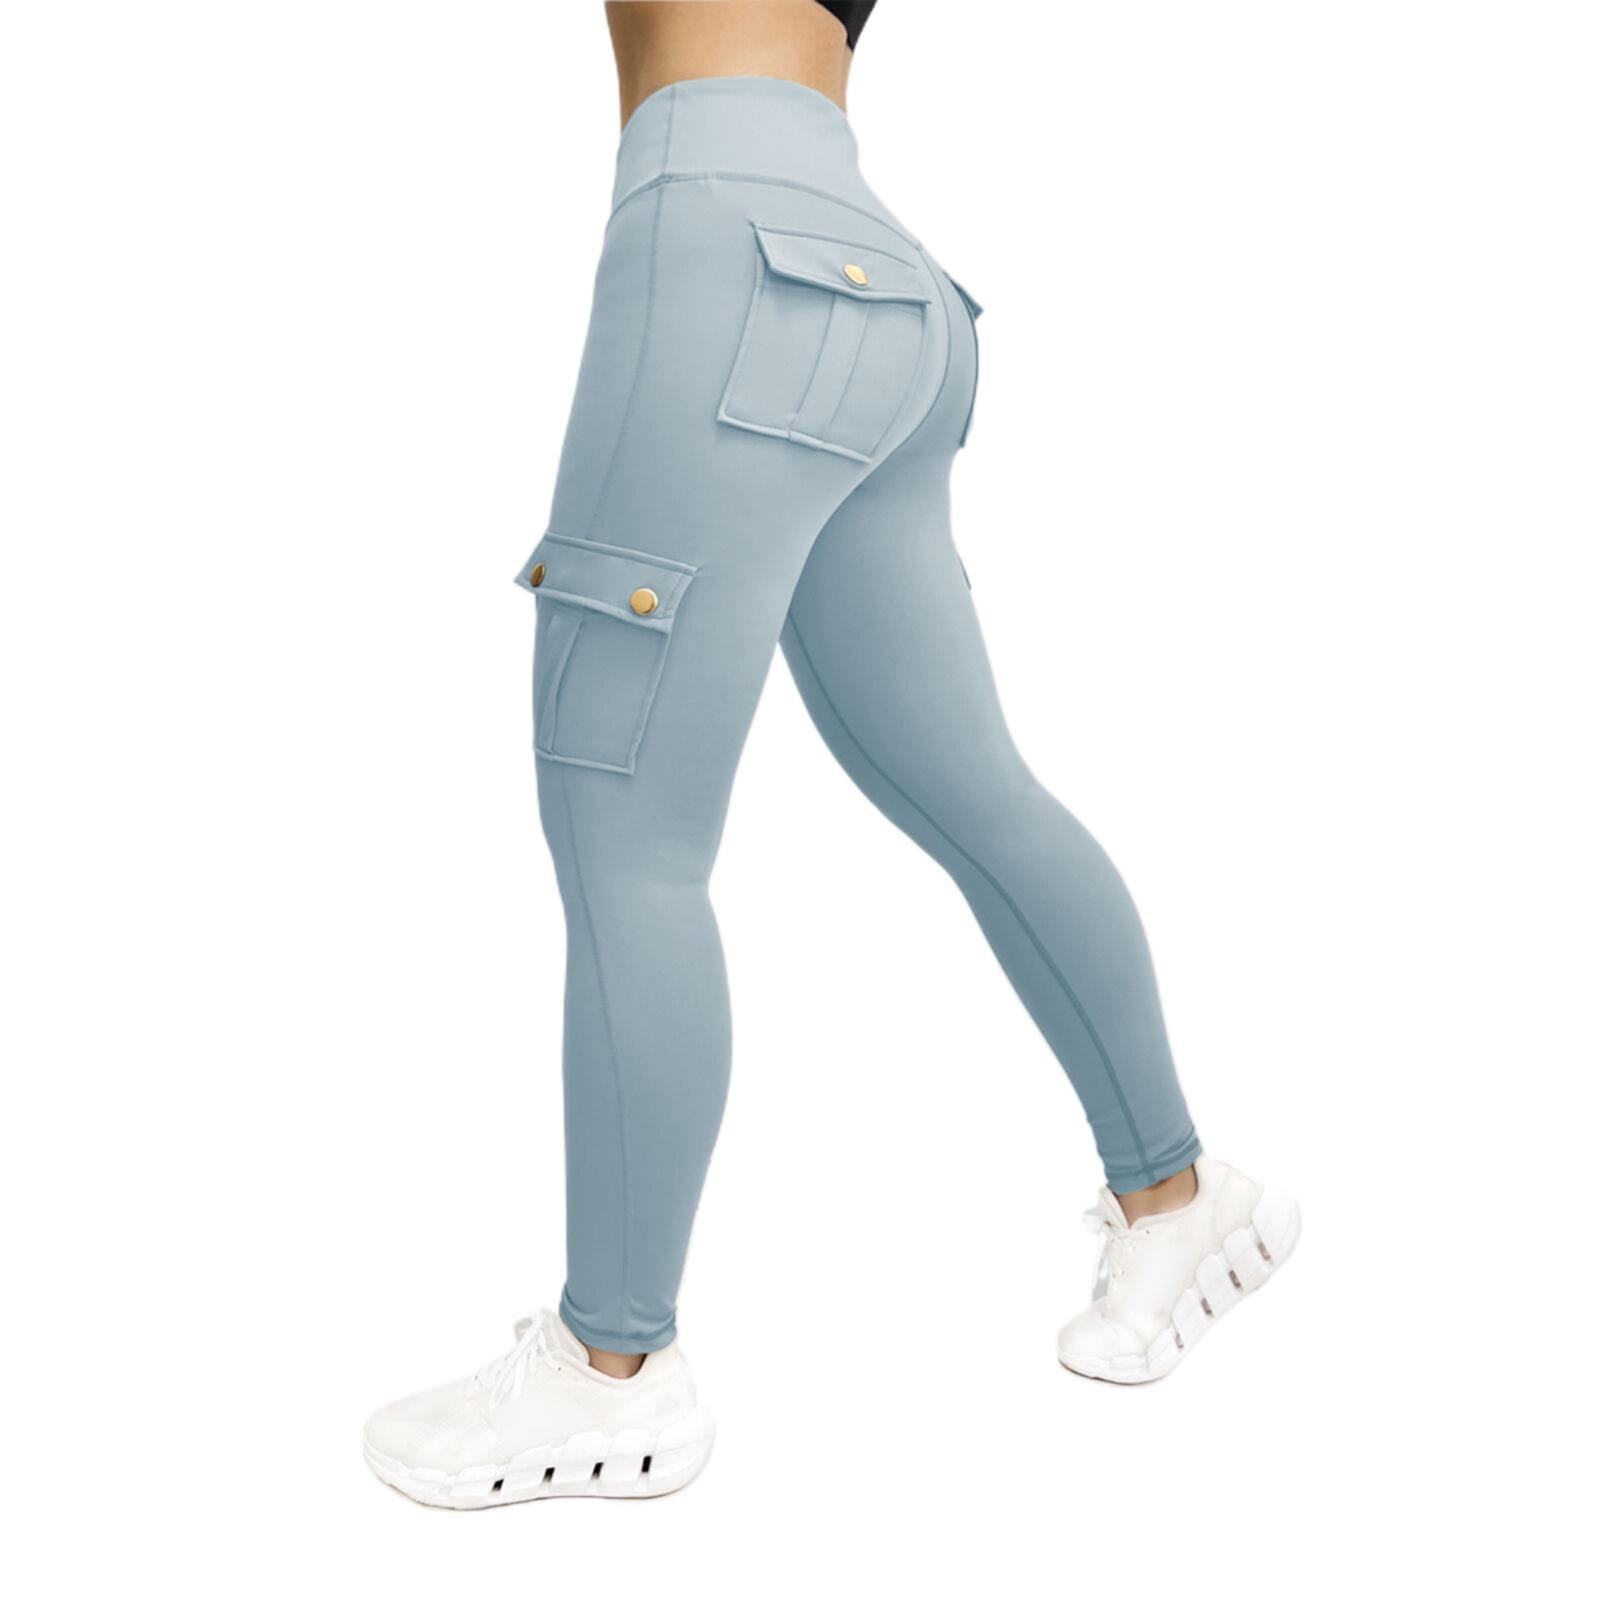 FAIWAD High Waisted Leggings for Women Stretch Soft Athletic Pants